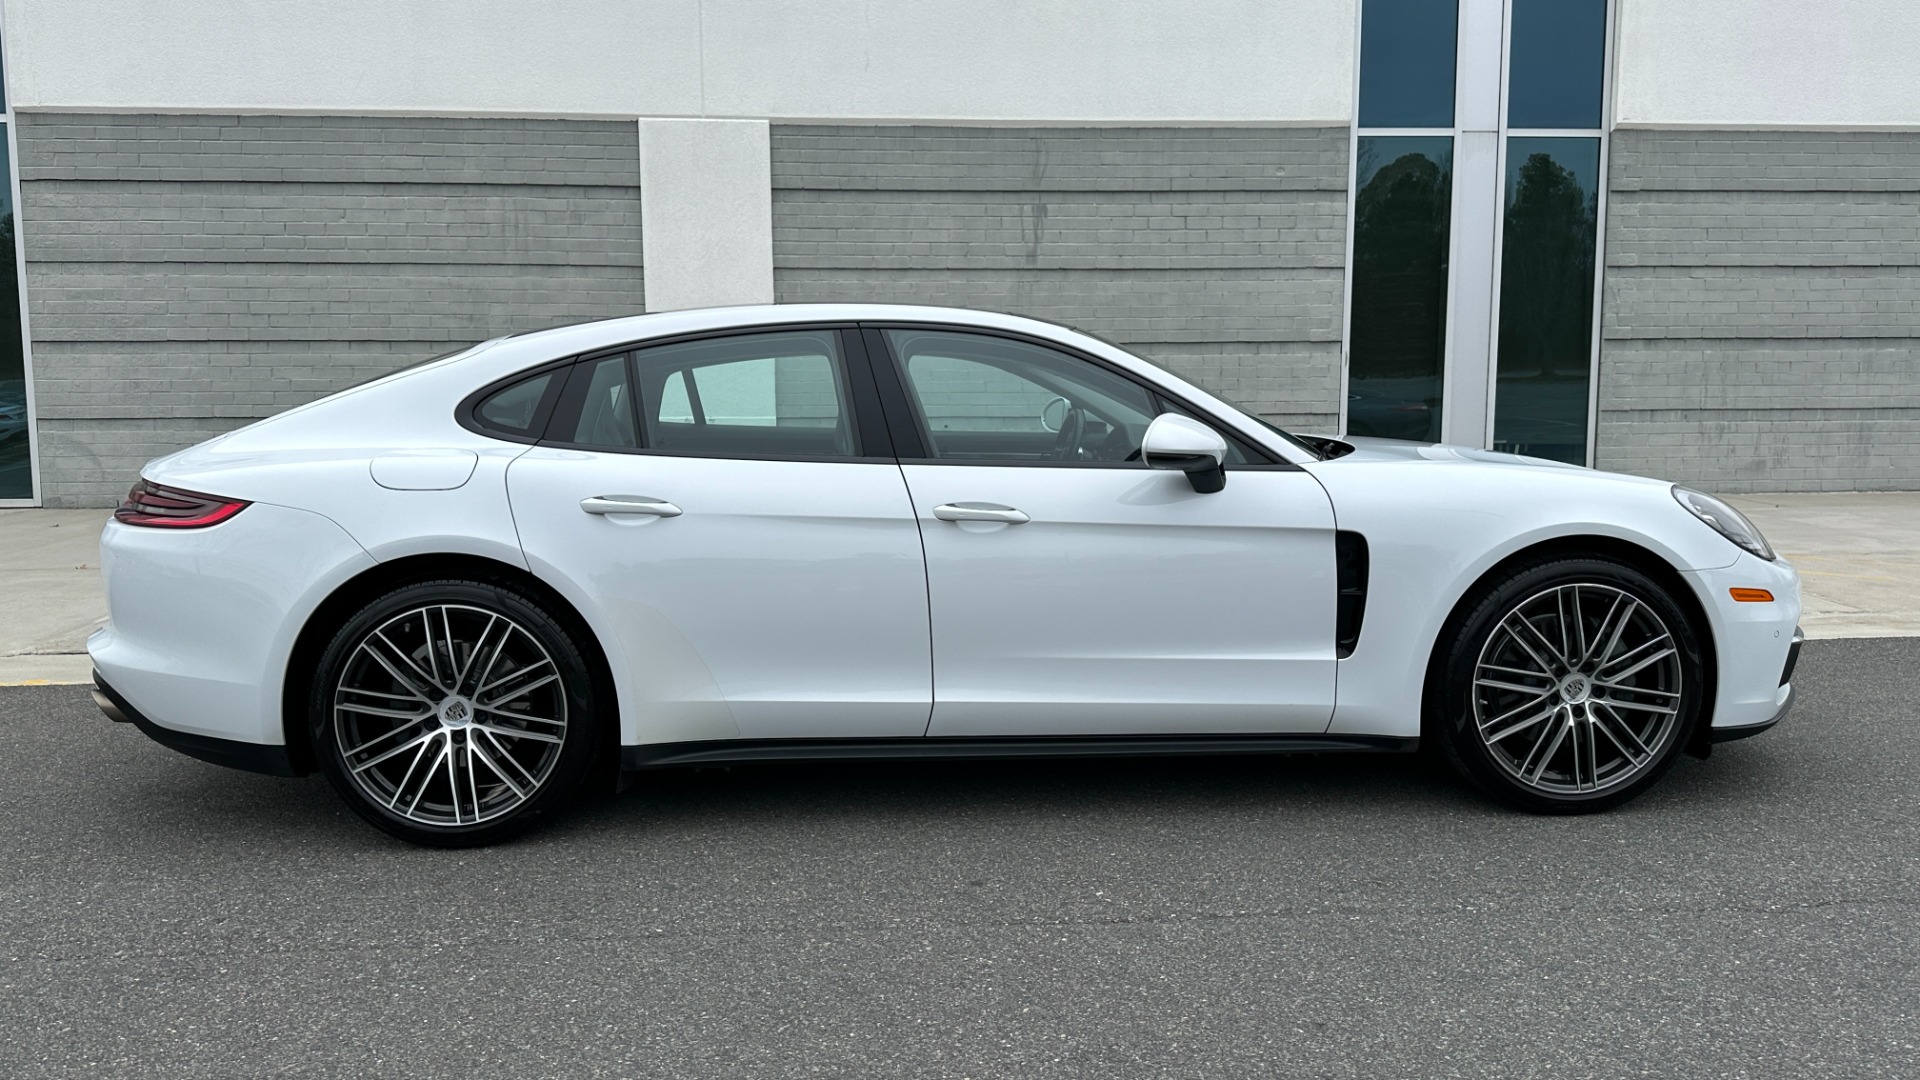 Used 2017 Porsche PANAMERA 4S / AWD / 2.9L TURBO / PREMIUM / SPORT CHRONO / BOSE / REARVIEW for sale $81,000 at Formula Imports in Charlotte NC 28227 6